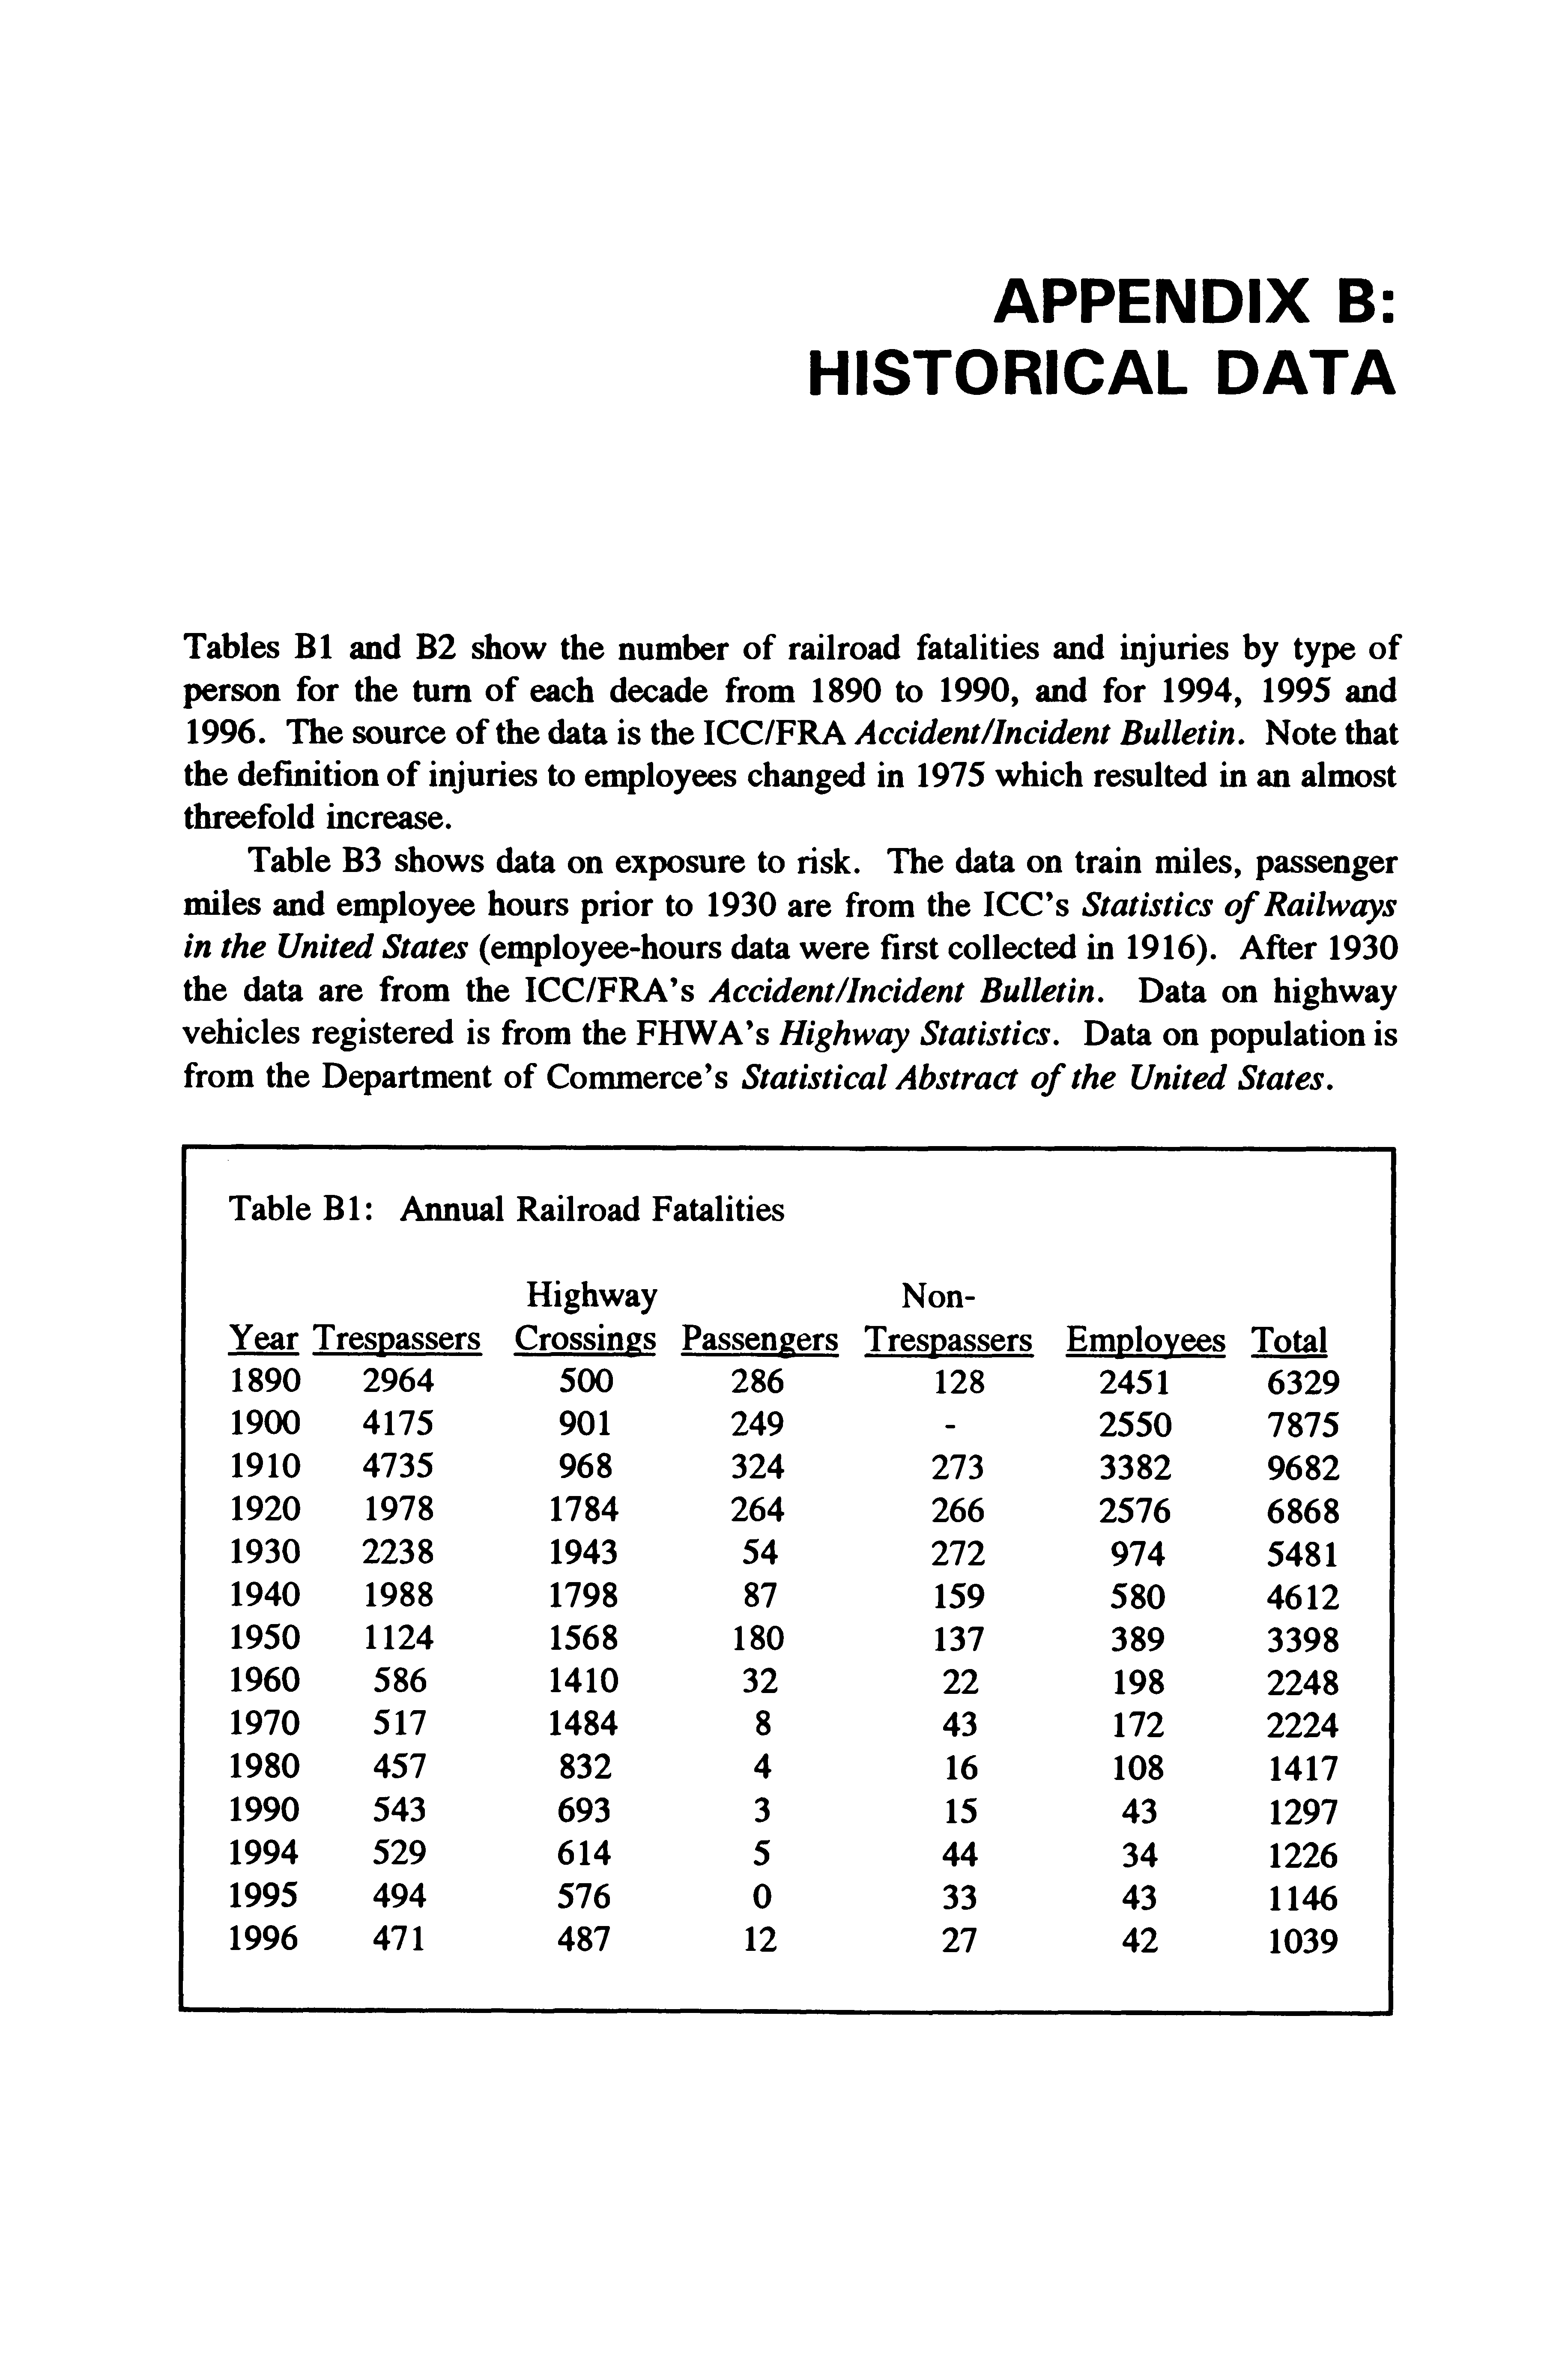 Table B3 shows data on exposure to risk. The data on train miles, passenger miles and employee hours prior to 1930 are from the ICC s Statistics of Railways in the United States (employee-hours data were first collected in 1916). After 1930 the data are from the ICC/FRA s Accident/Incident Bulletin. Data on highway vehicles registered is from the FHWA s Highway Statistics. Data on population is from the Department of Commerce s Statistical Abstract of the United States.